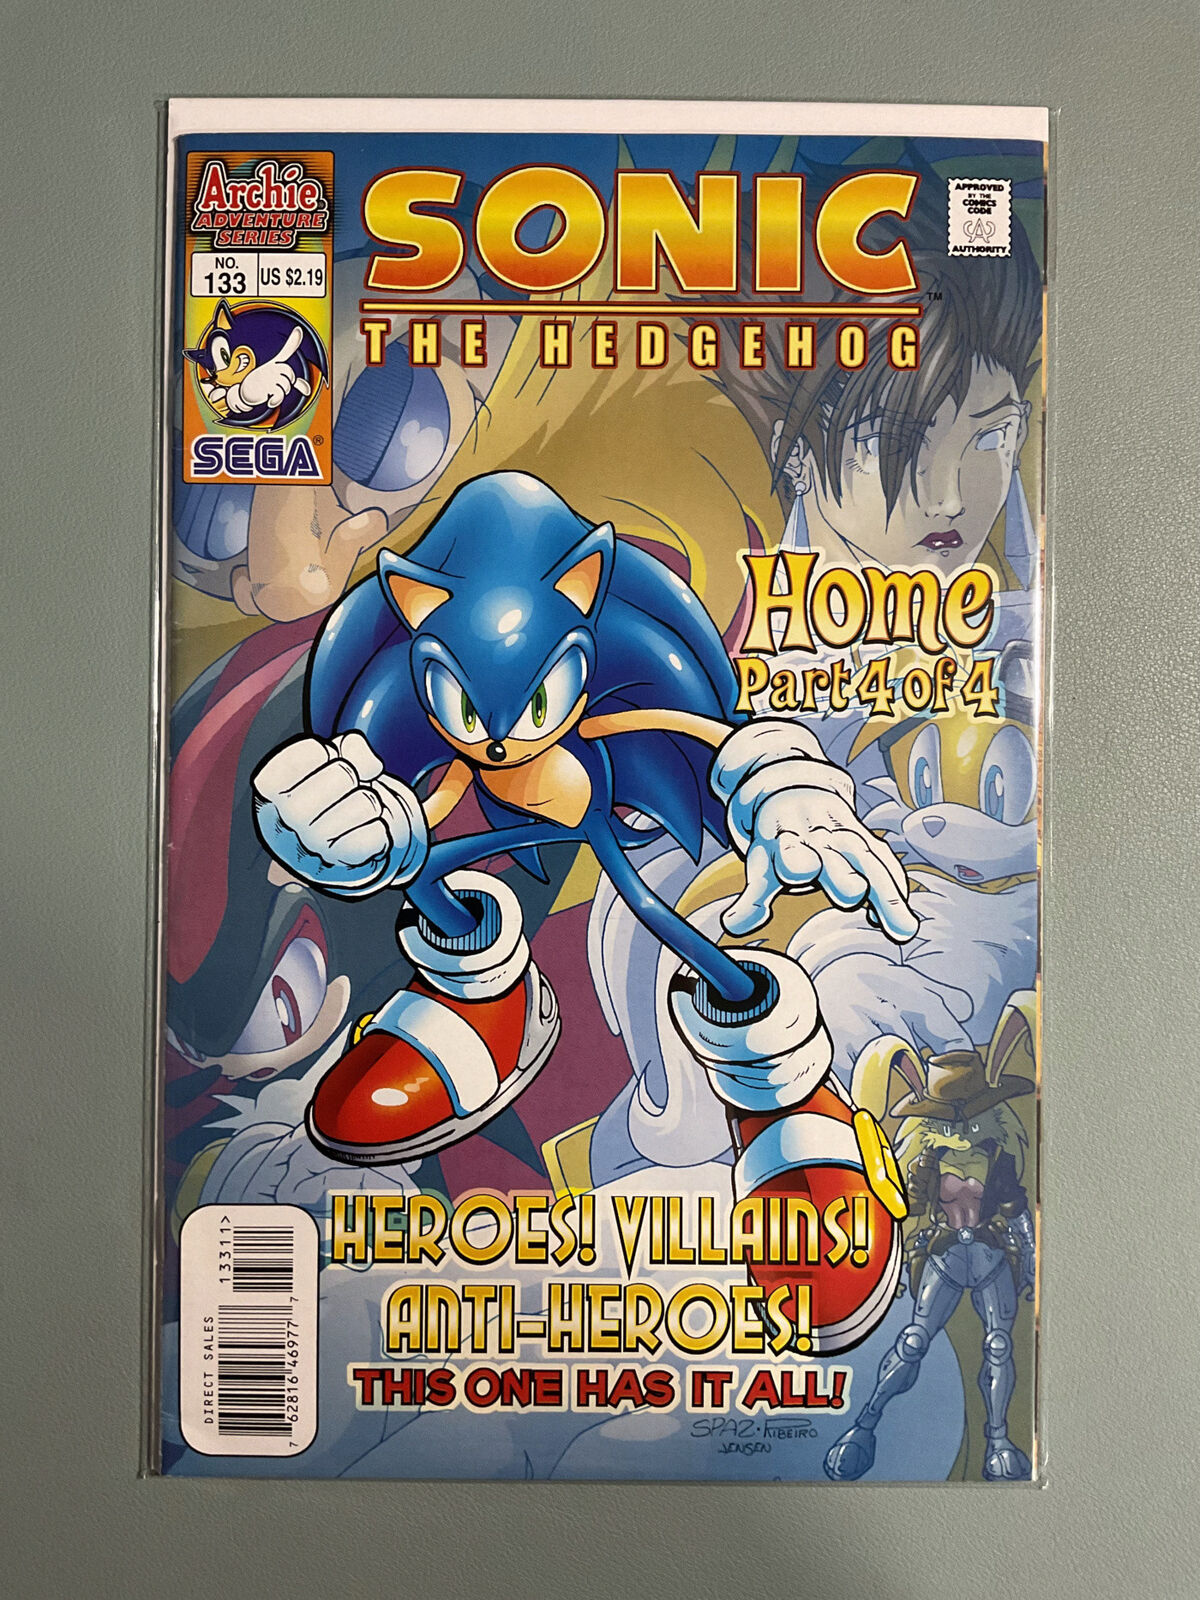 Sonic the Hedgehog(vol. 1) #133 - Archie Comics - Combine Shipping